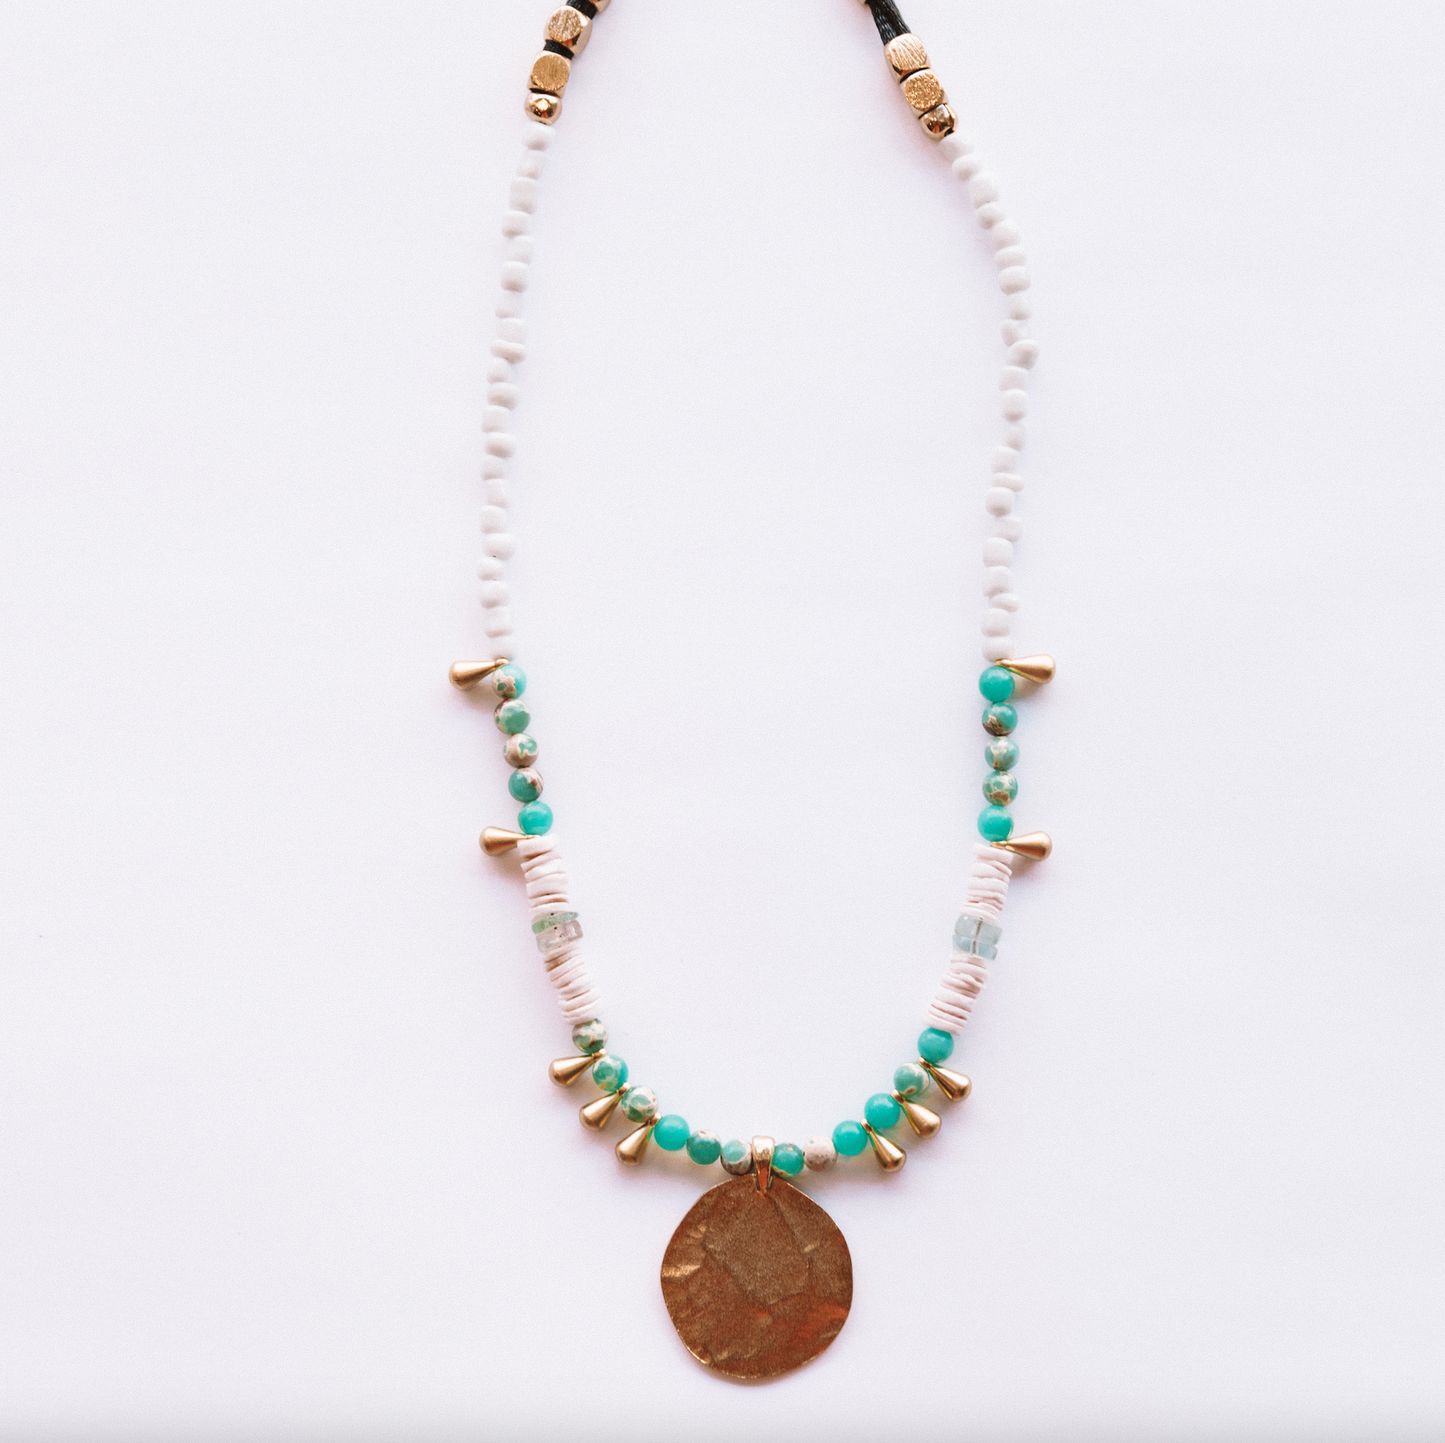 The Turquoise And White Coin Necklace